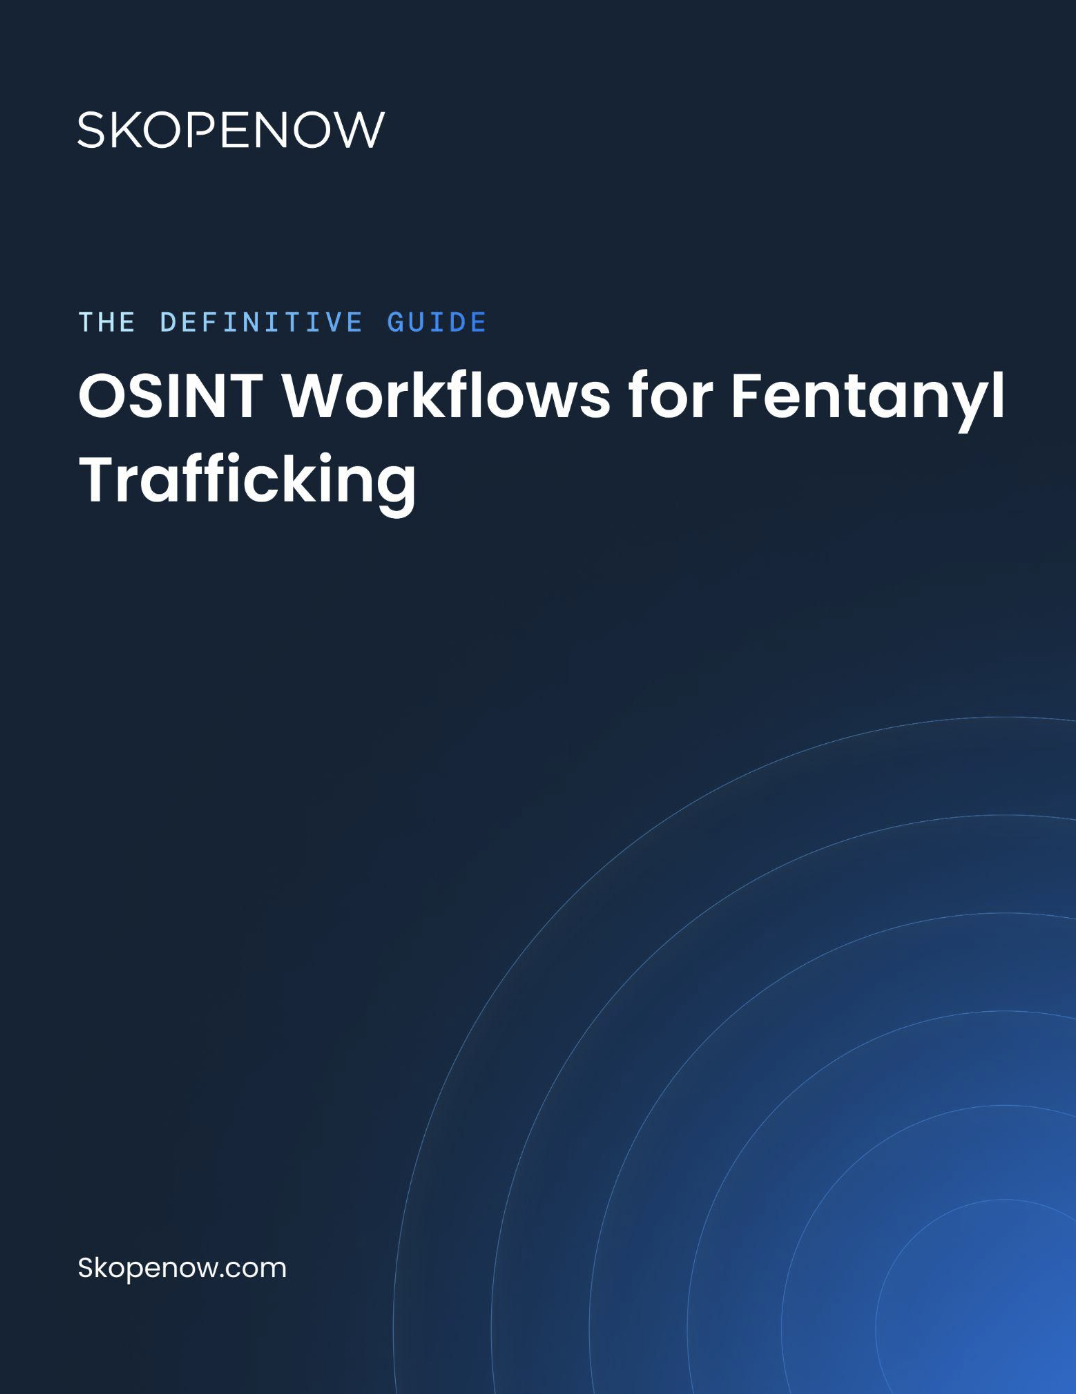 The Definitive Guide: OSINT Workflows for Fentanyl Trafficking